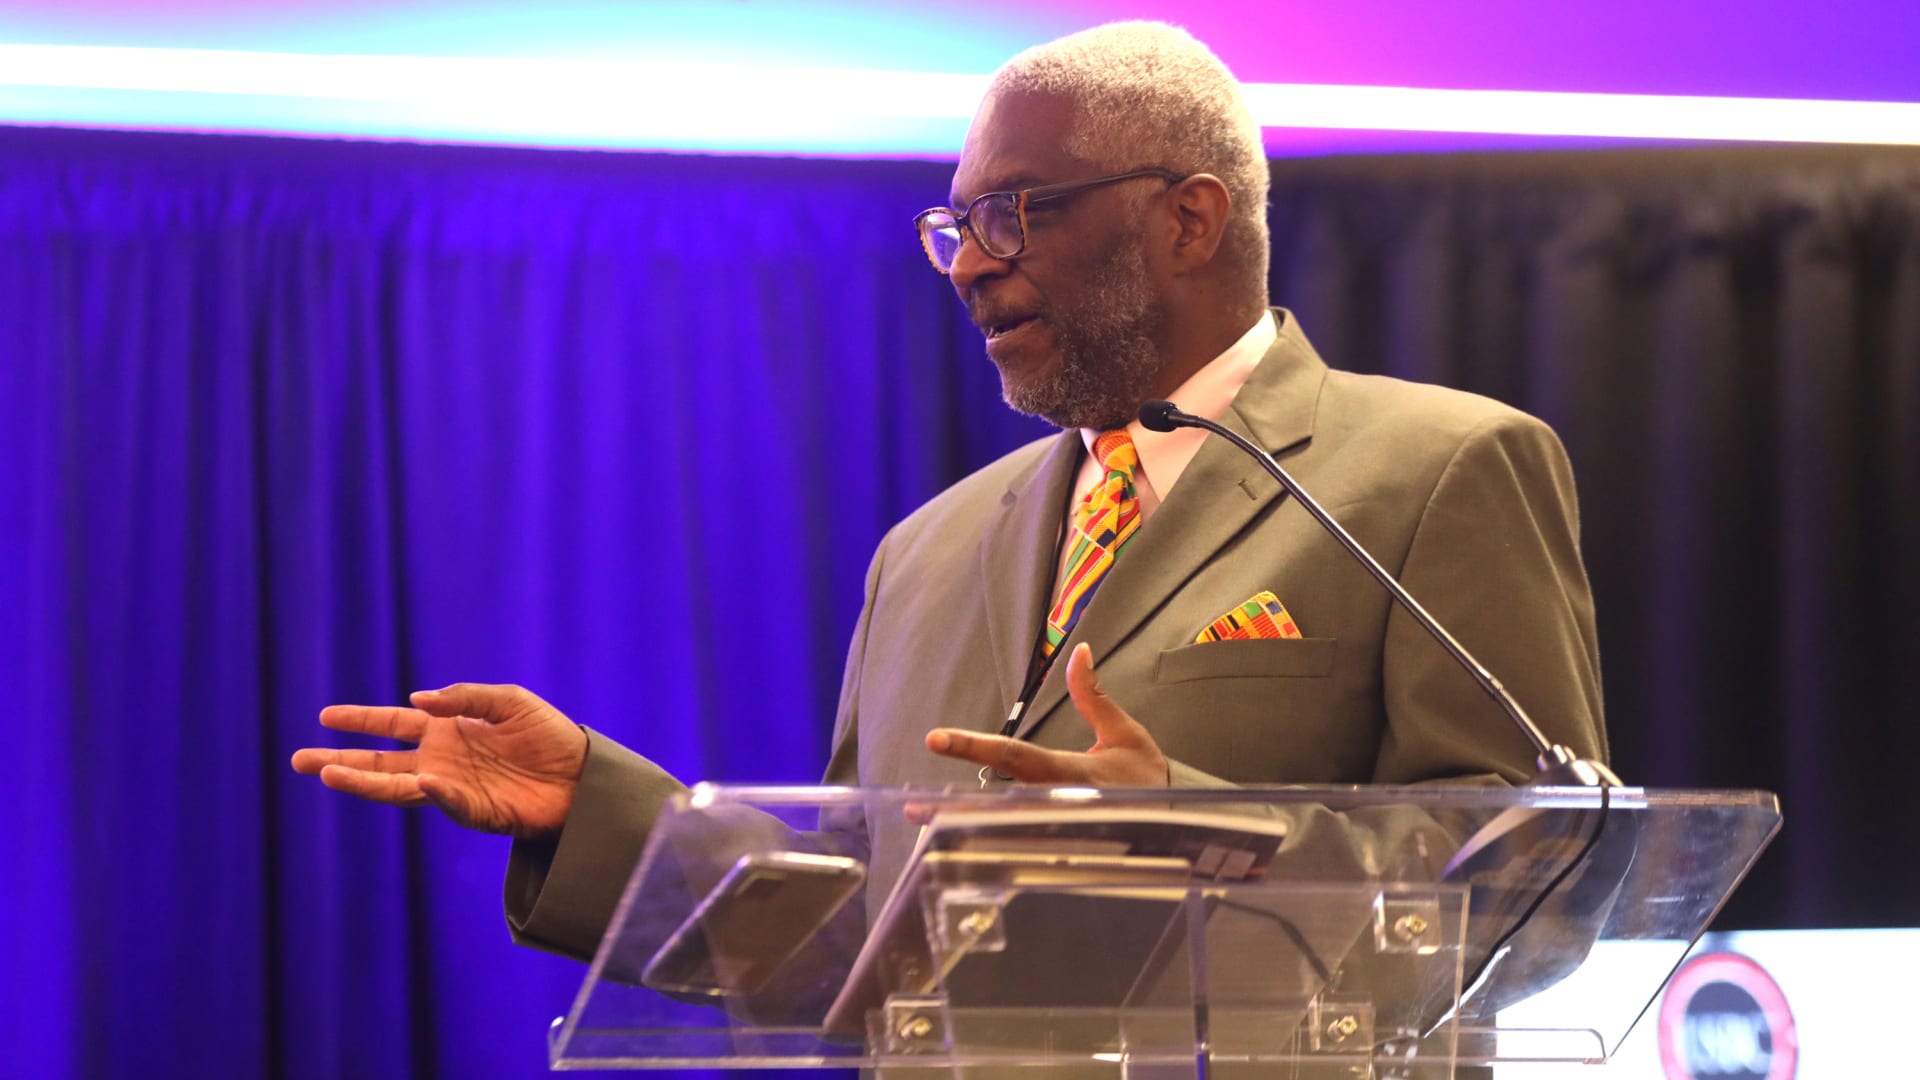 John W. Templeton gives a speech at the U.S. Black Chambers in Washington, D.C., on July 14, part of the runup to the 19th annual Journal of Black Innovation National Black Business Month.